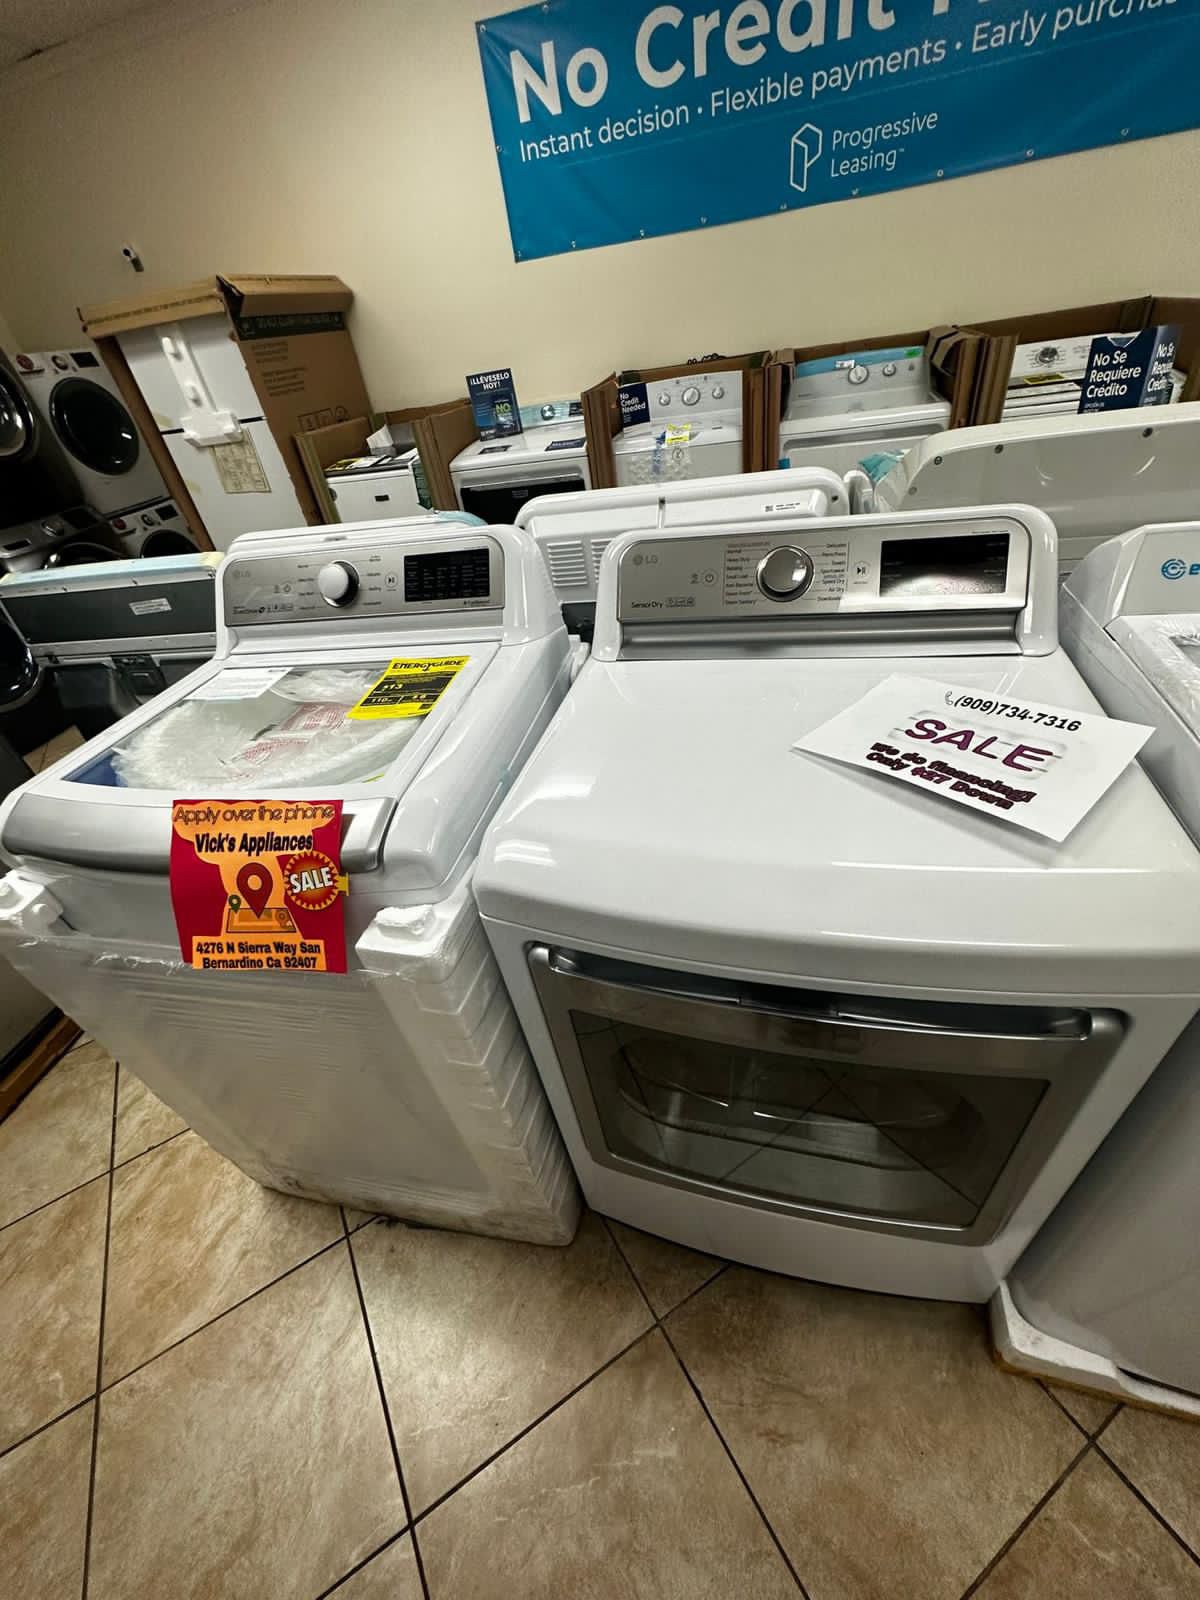 New LG Washer And Dryer Set